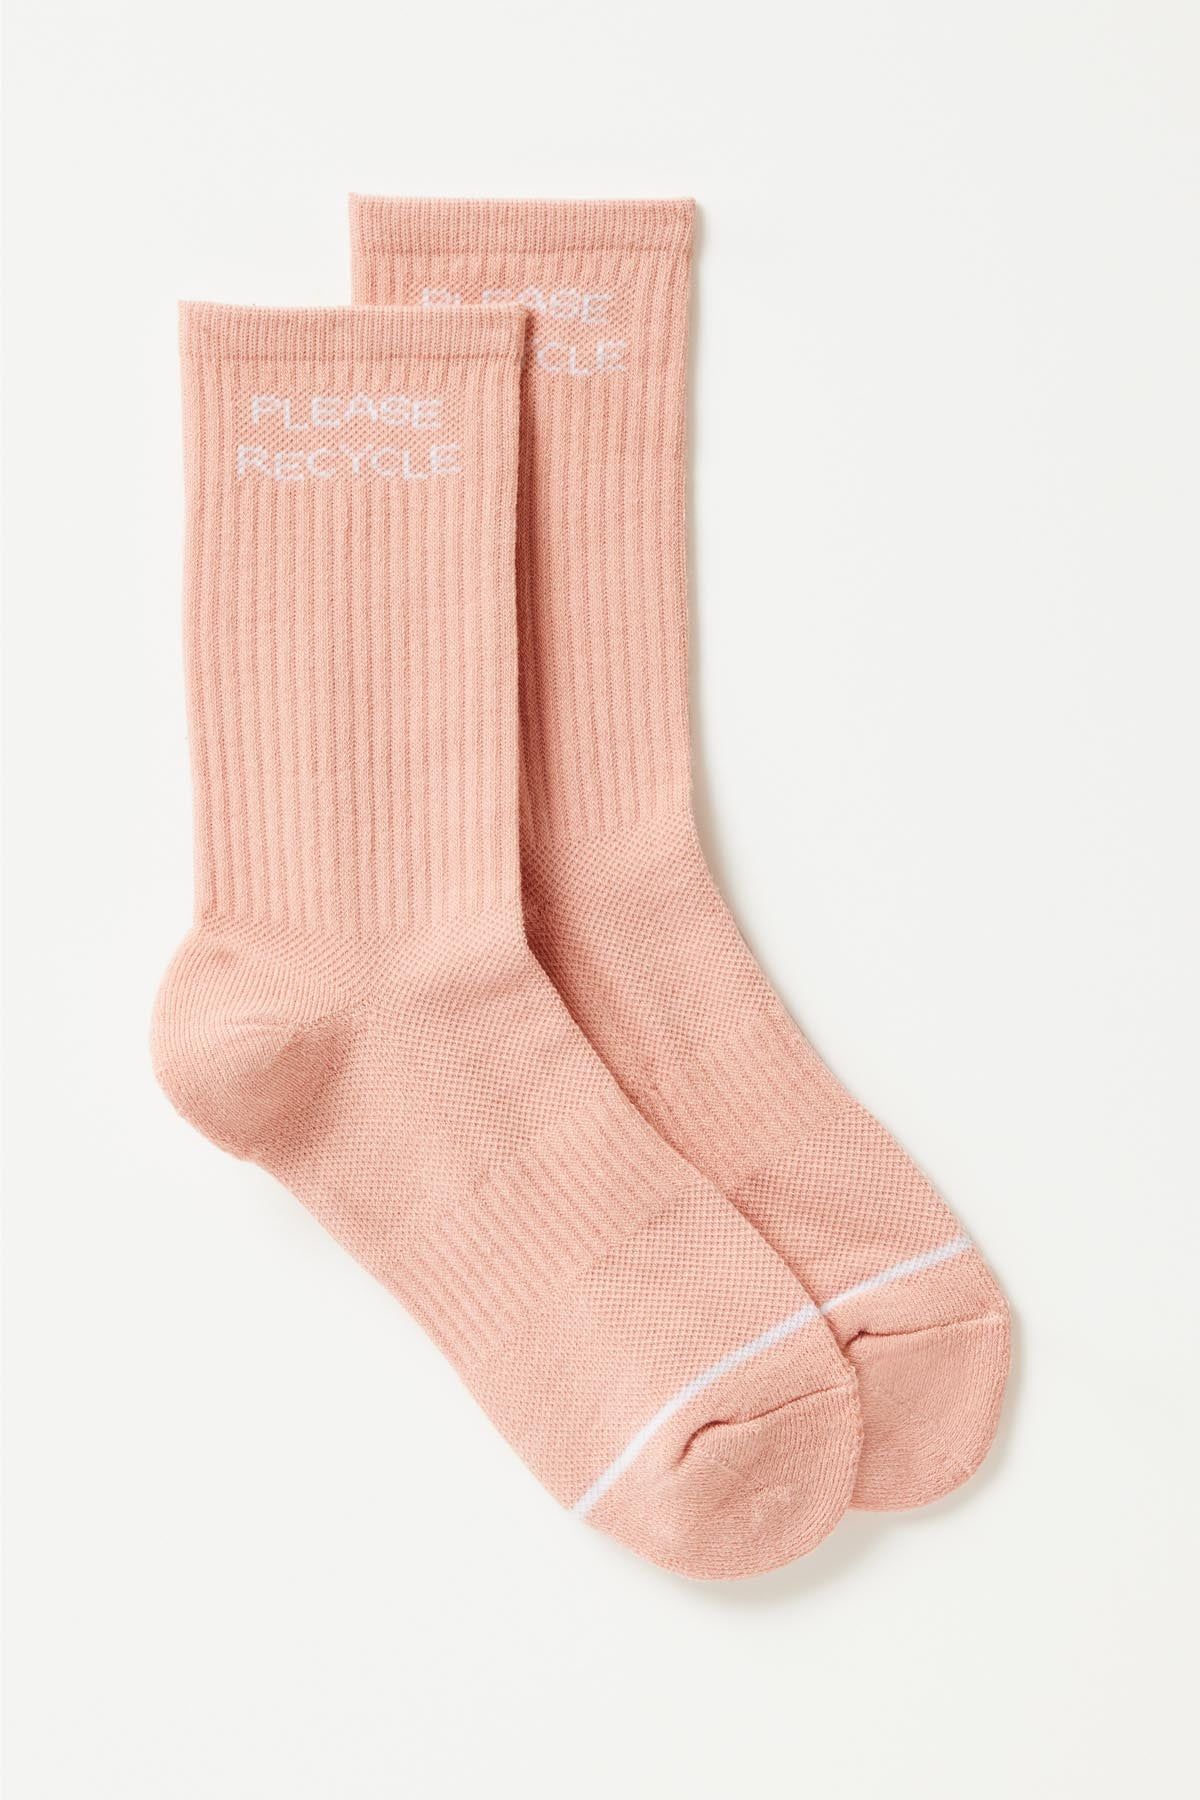 Misty Rose Please Recycle Crew Sock | Girlfriend Collective